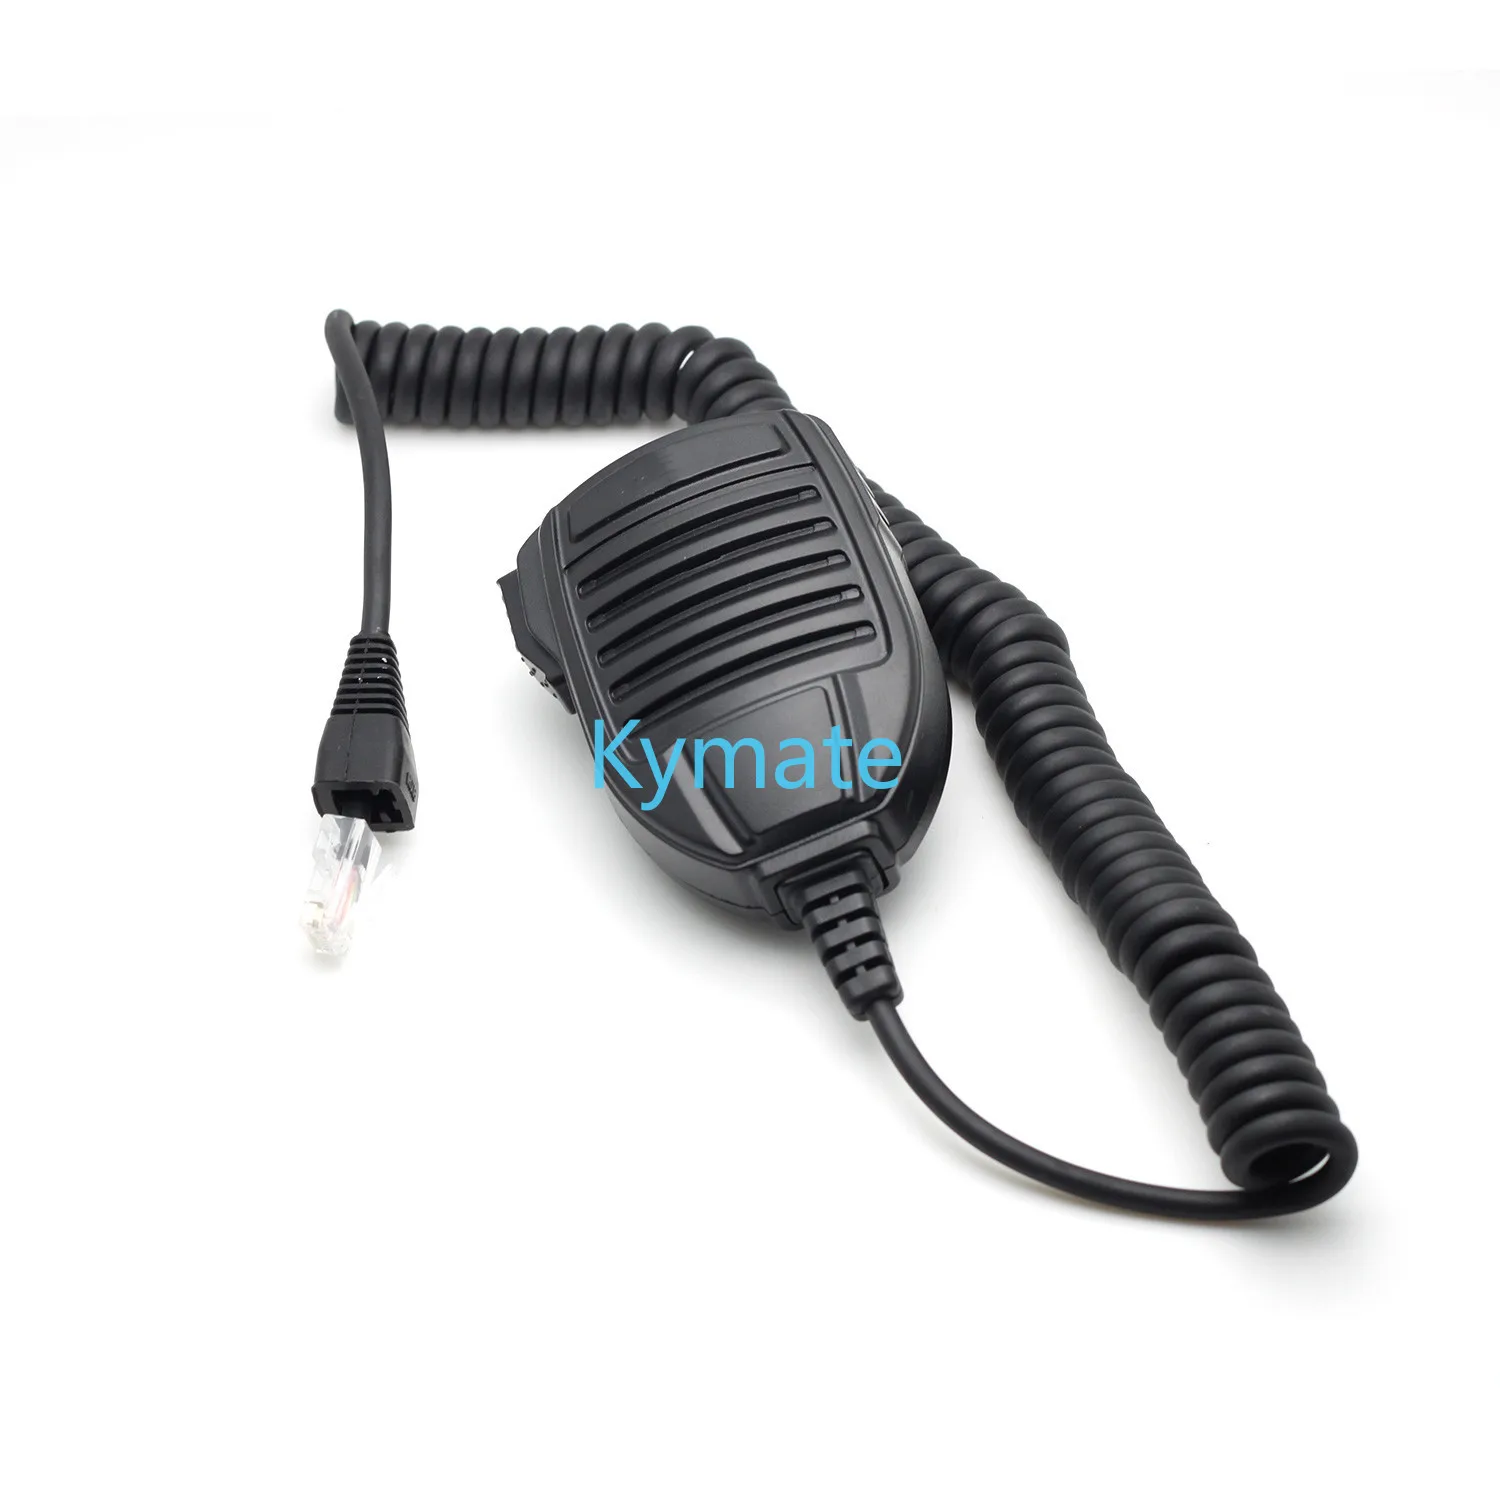 

8Pin Speaker Mic MH-67A8J For Yaesu Radio FT-817, FT-450, FT-817ND, FT-857D, FT-897D, FT-900, FT-2400 Vertex Two Way Radio